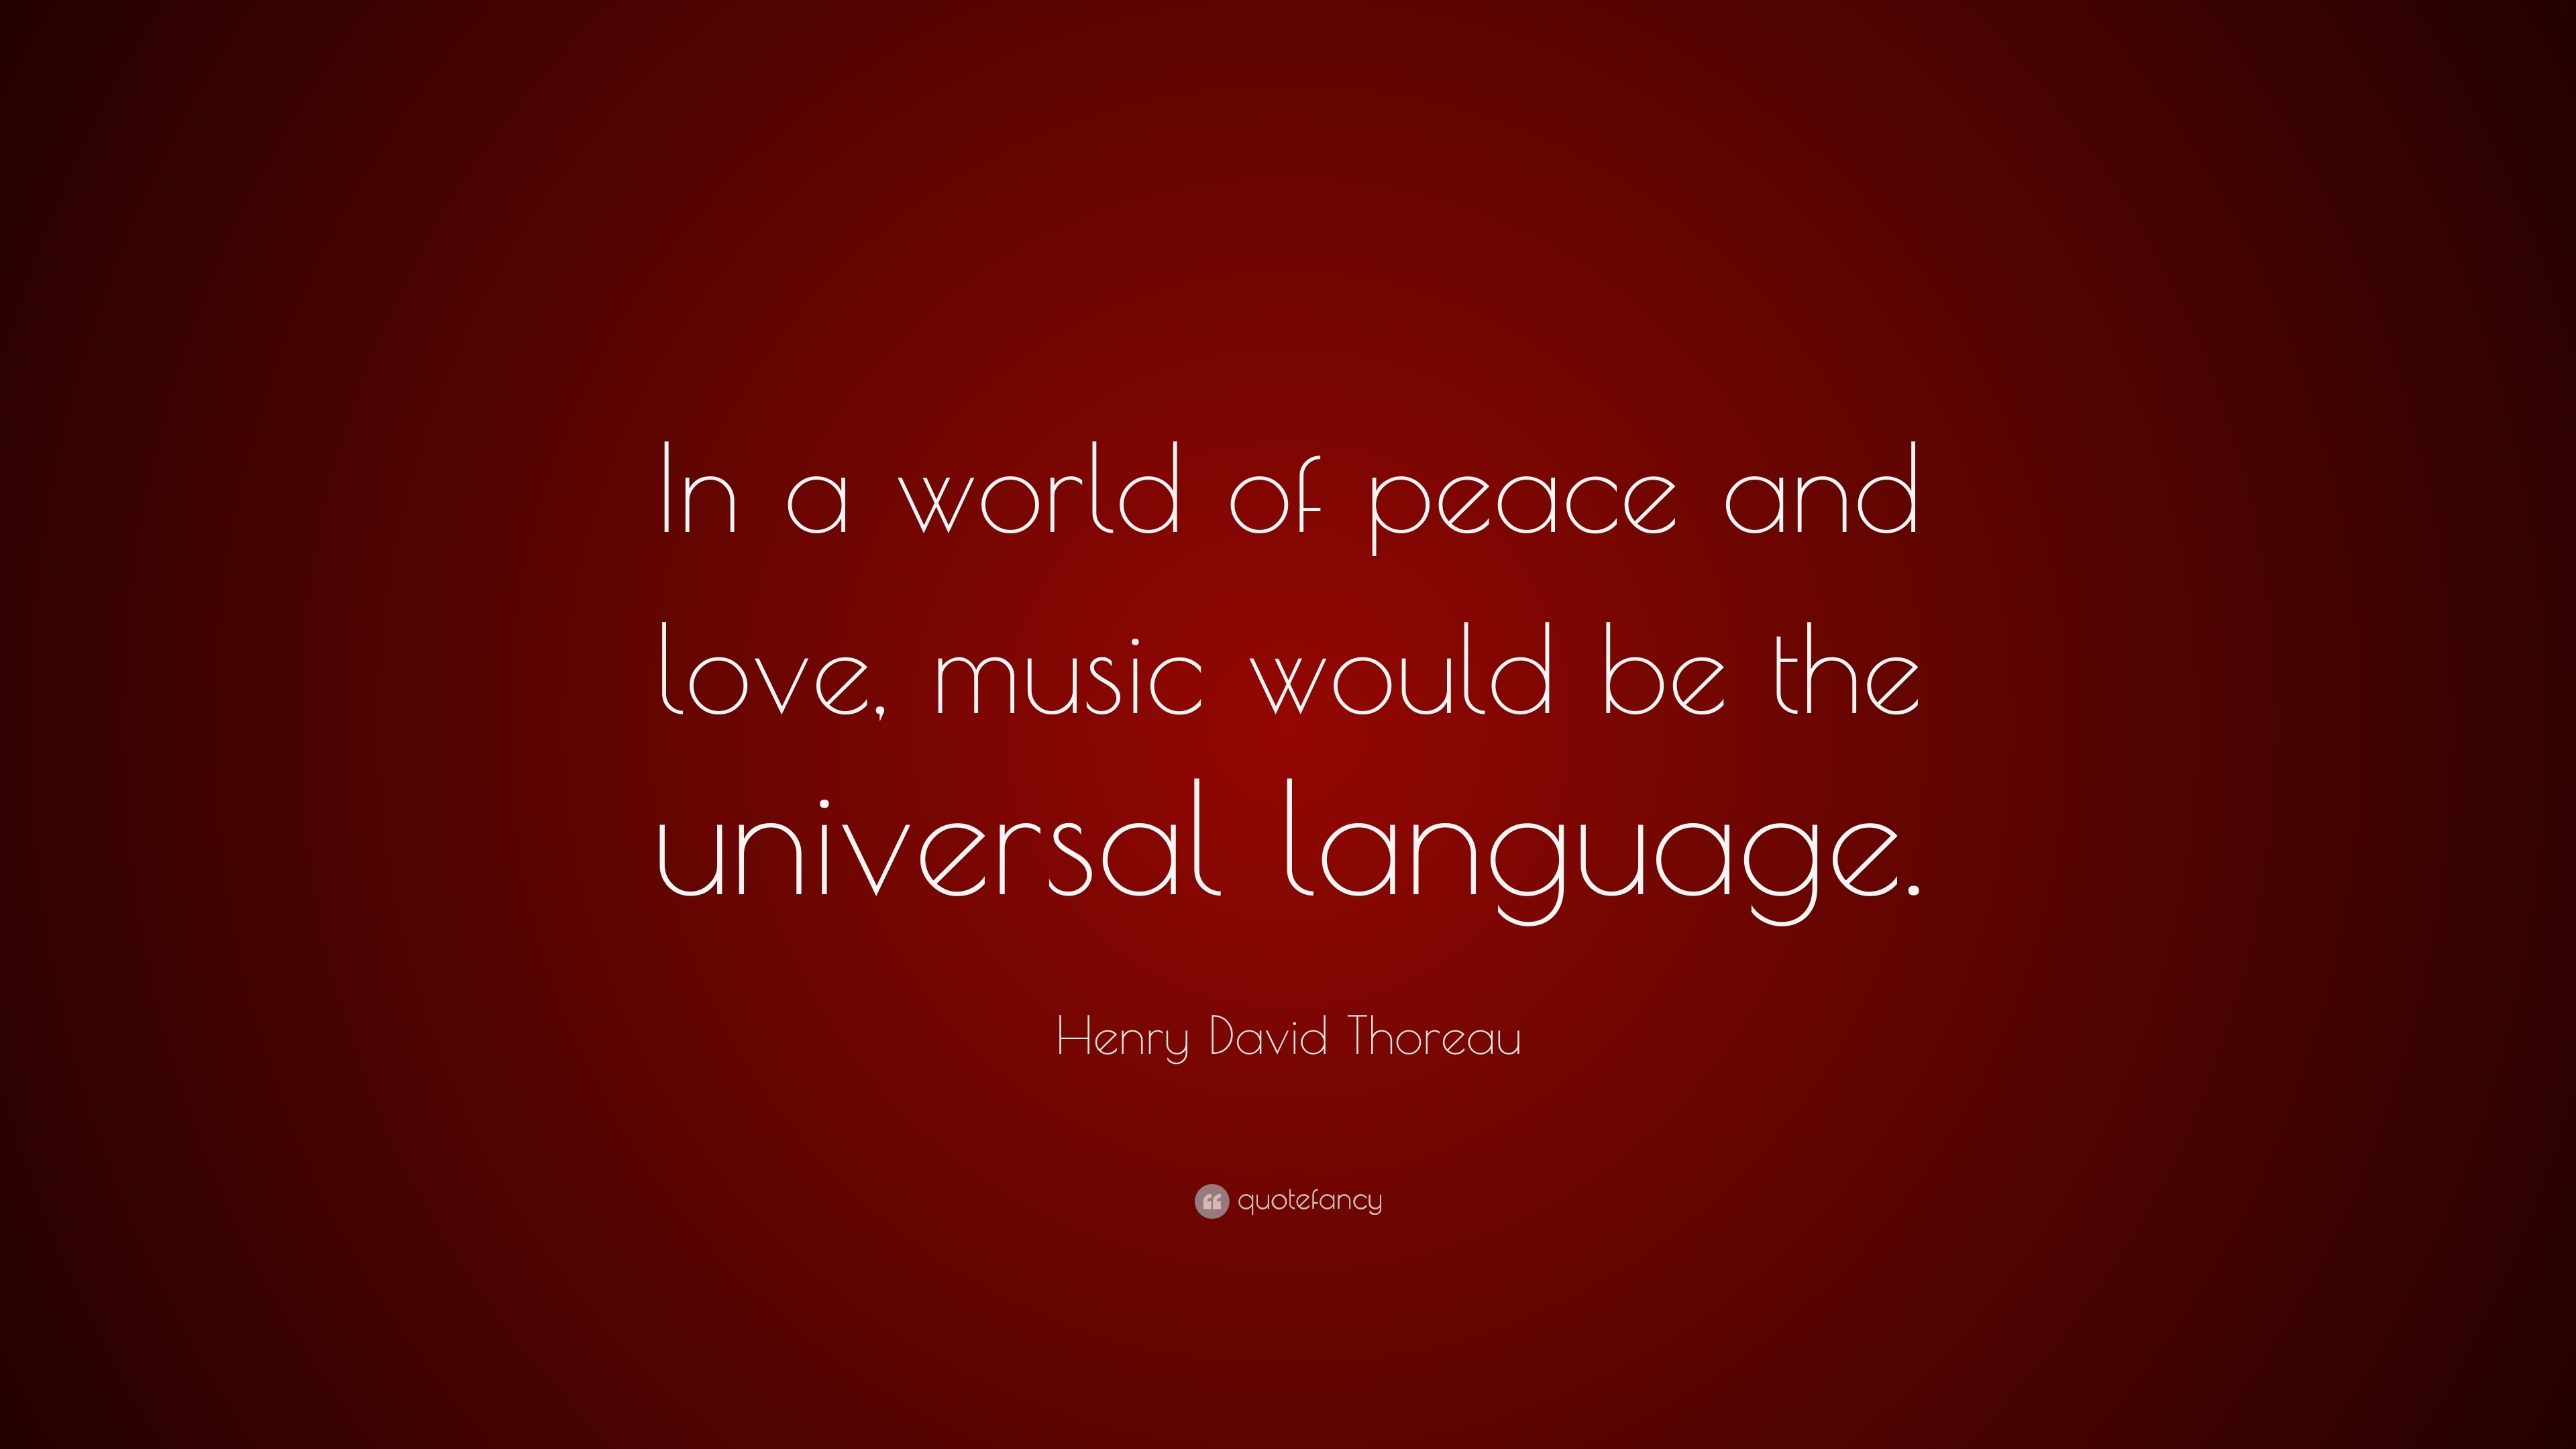 3840x2160 Henry David Thoreau Quote: “In a world of peace and love, music would